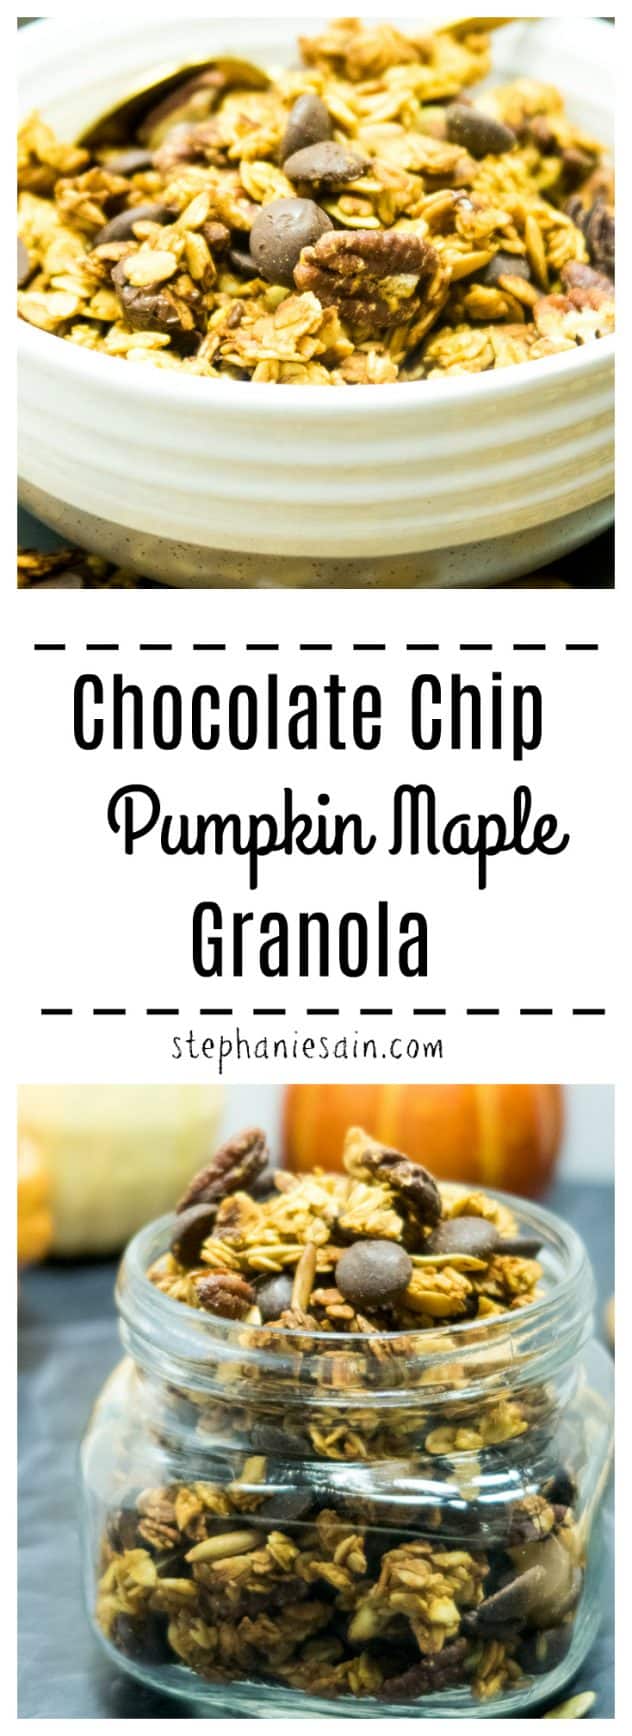 Chocolate Chip Pumpkin Maple Granola is an easy recipe bursting with Fall flavors of pumpkin, maple & pecans. Perfect for breakfast or a grab & go snacking. Vegan & Gluten Free.